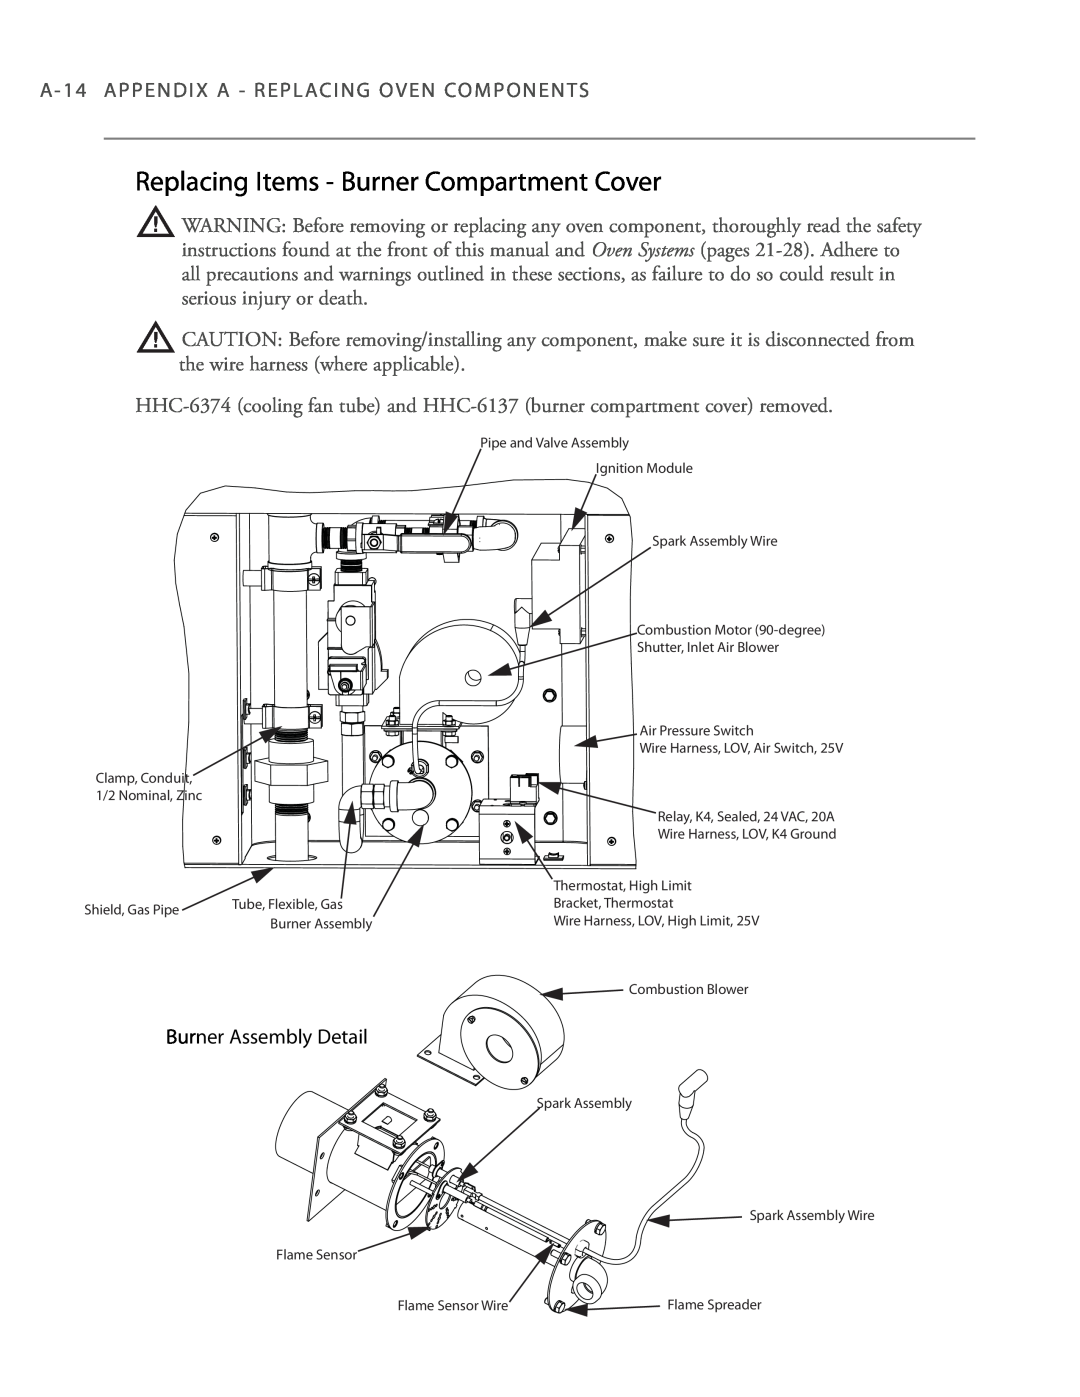 Turbo Chef Technologies 3240 manual Replacing Items - Burner Compartment Cover, Burner Assembly Detail 